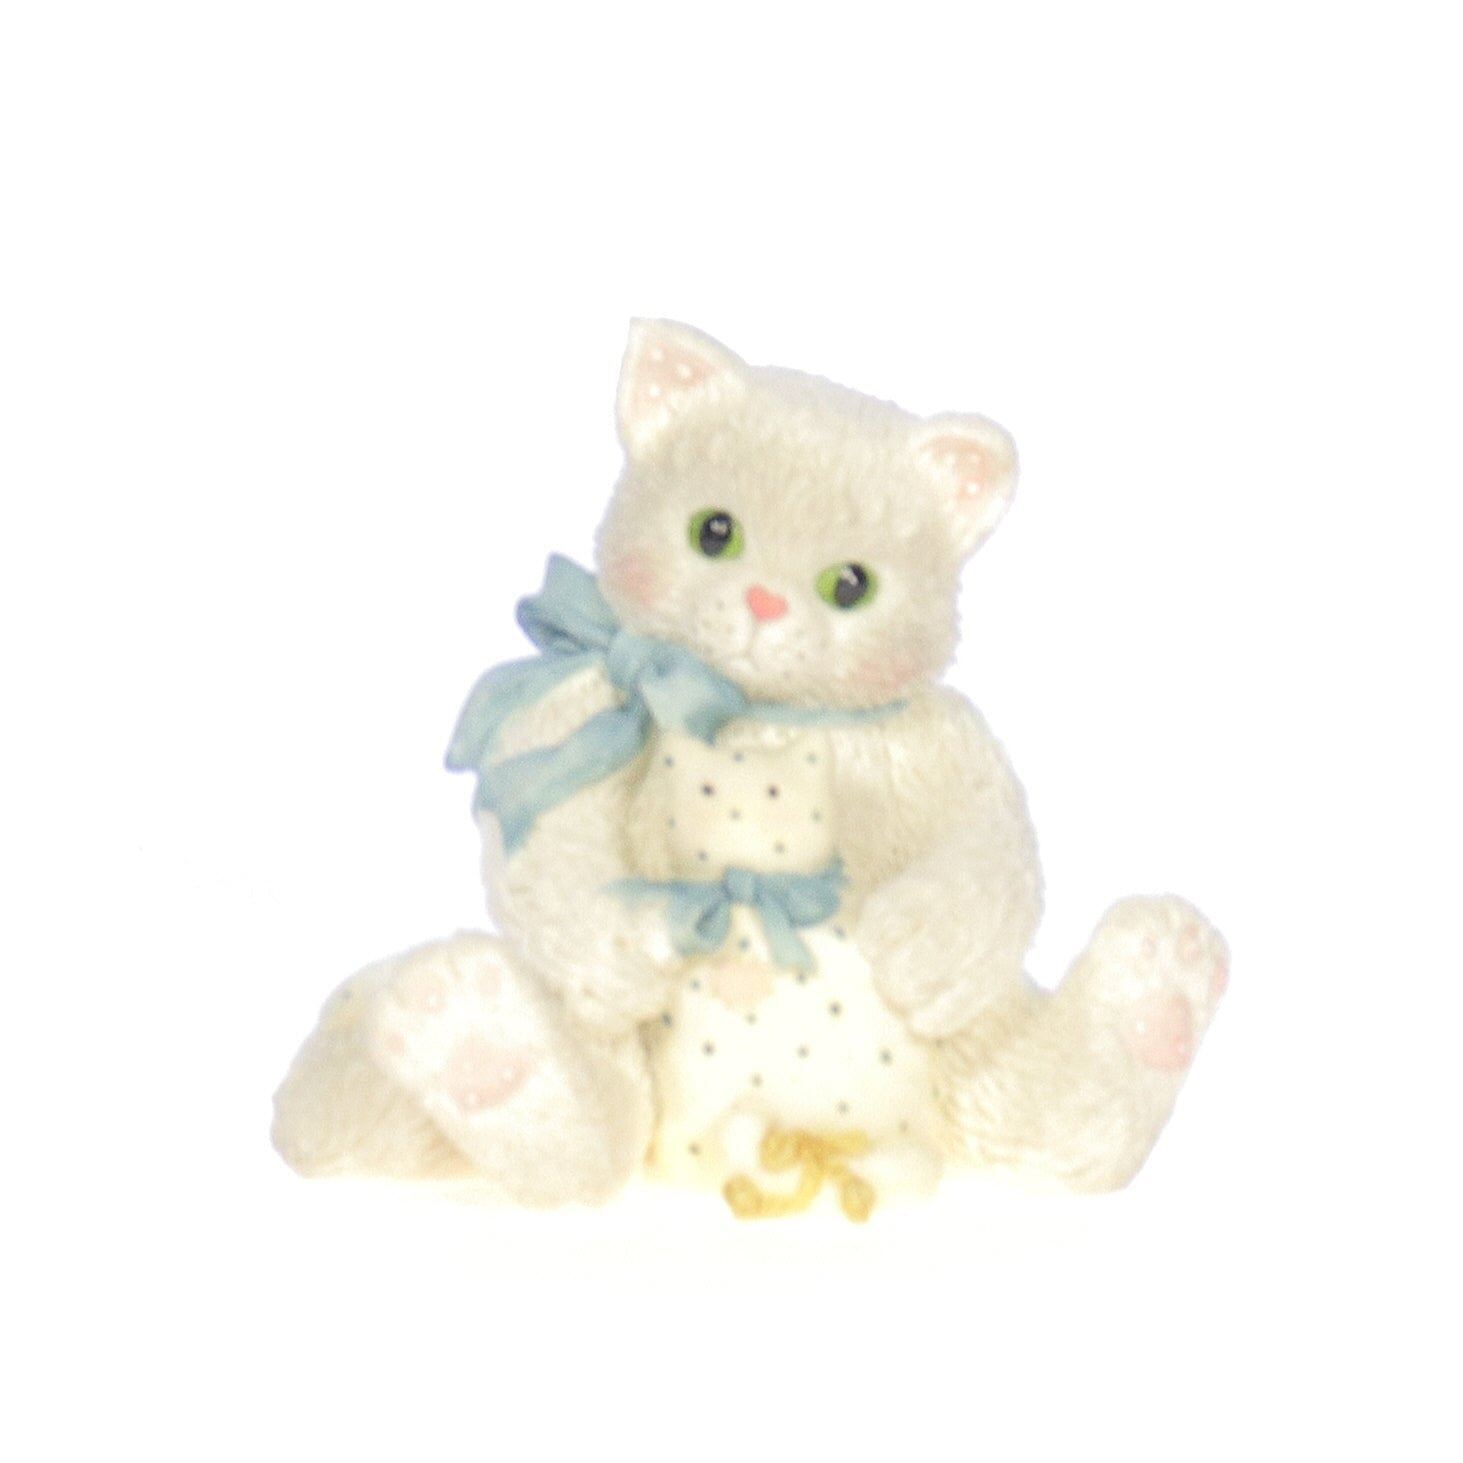 Calico Kittens Vintage 1994 Resin Figurine My Favoite Companion 112410